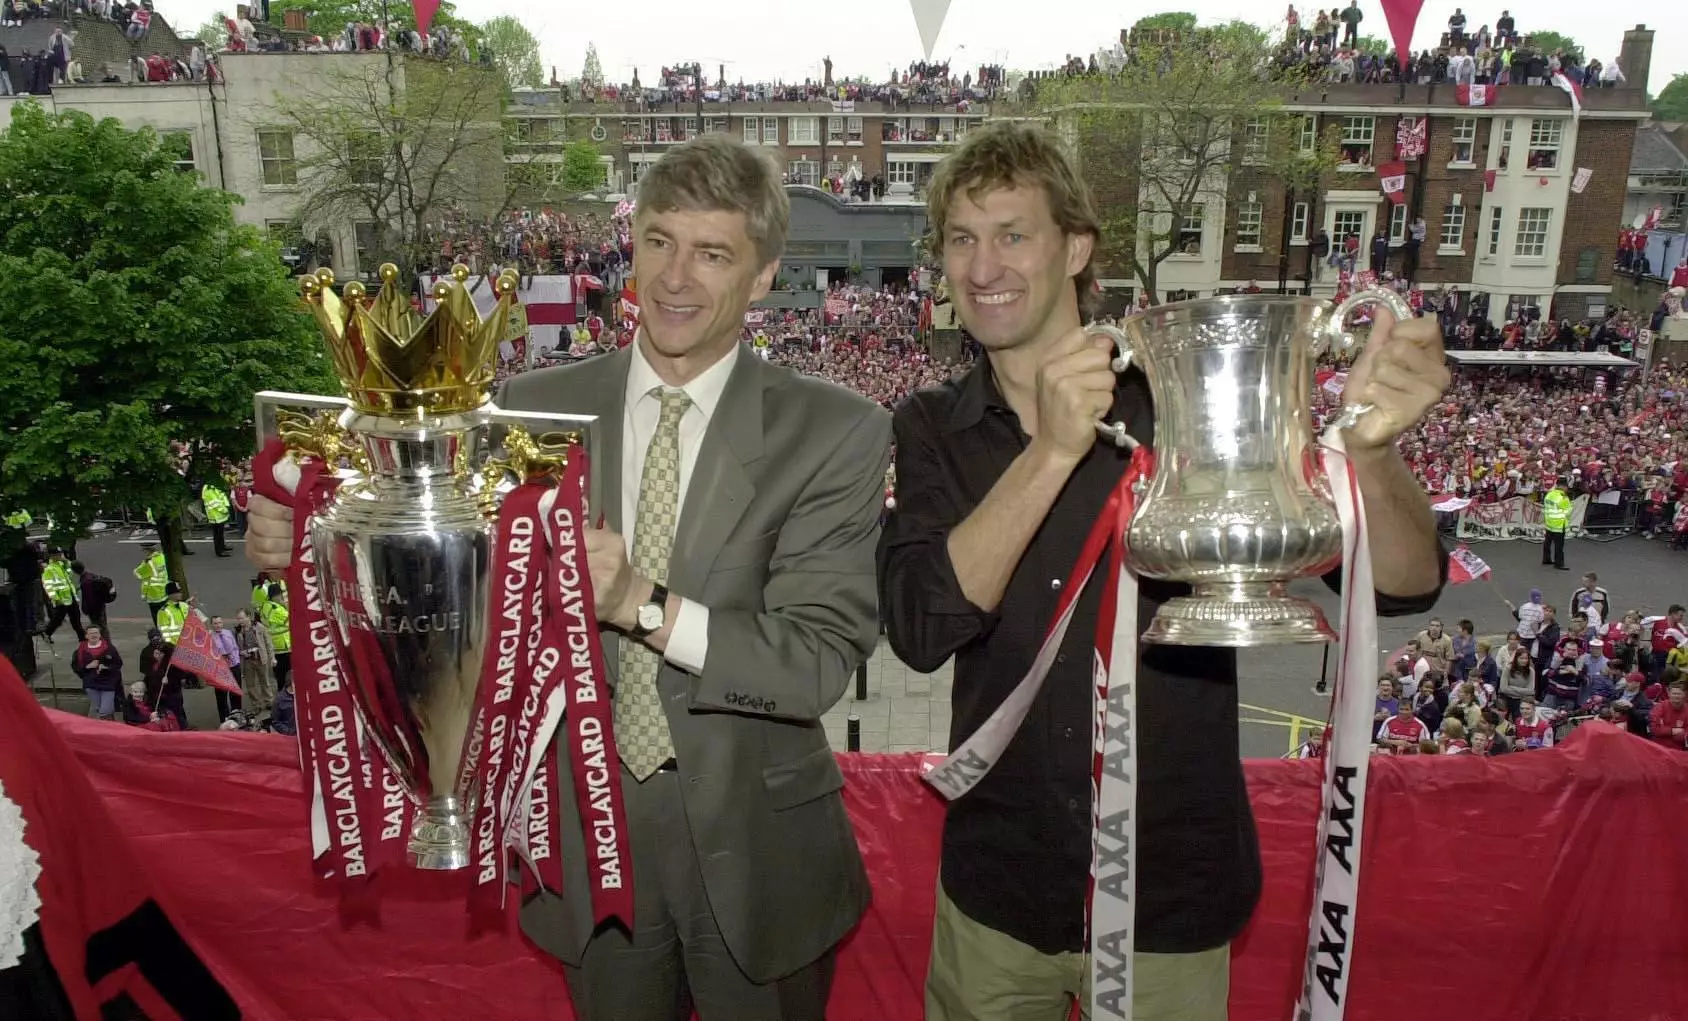 Wenger (L) and former Arsenal captain Tony Adams (R) holding the Premier League and FA Cup trophy. (Image